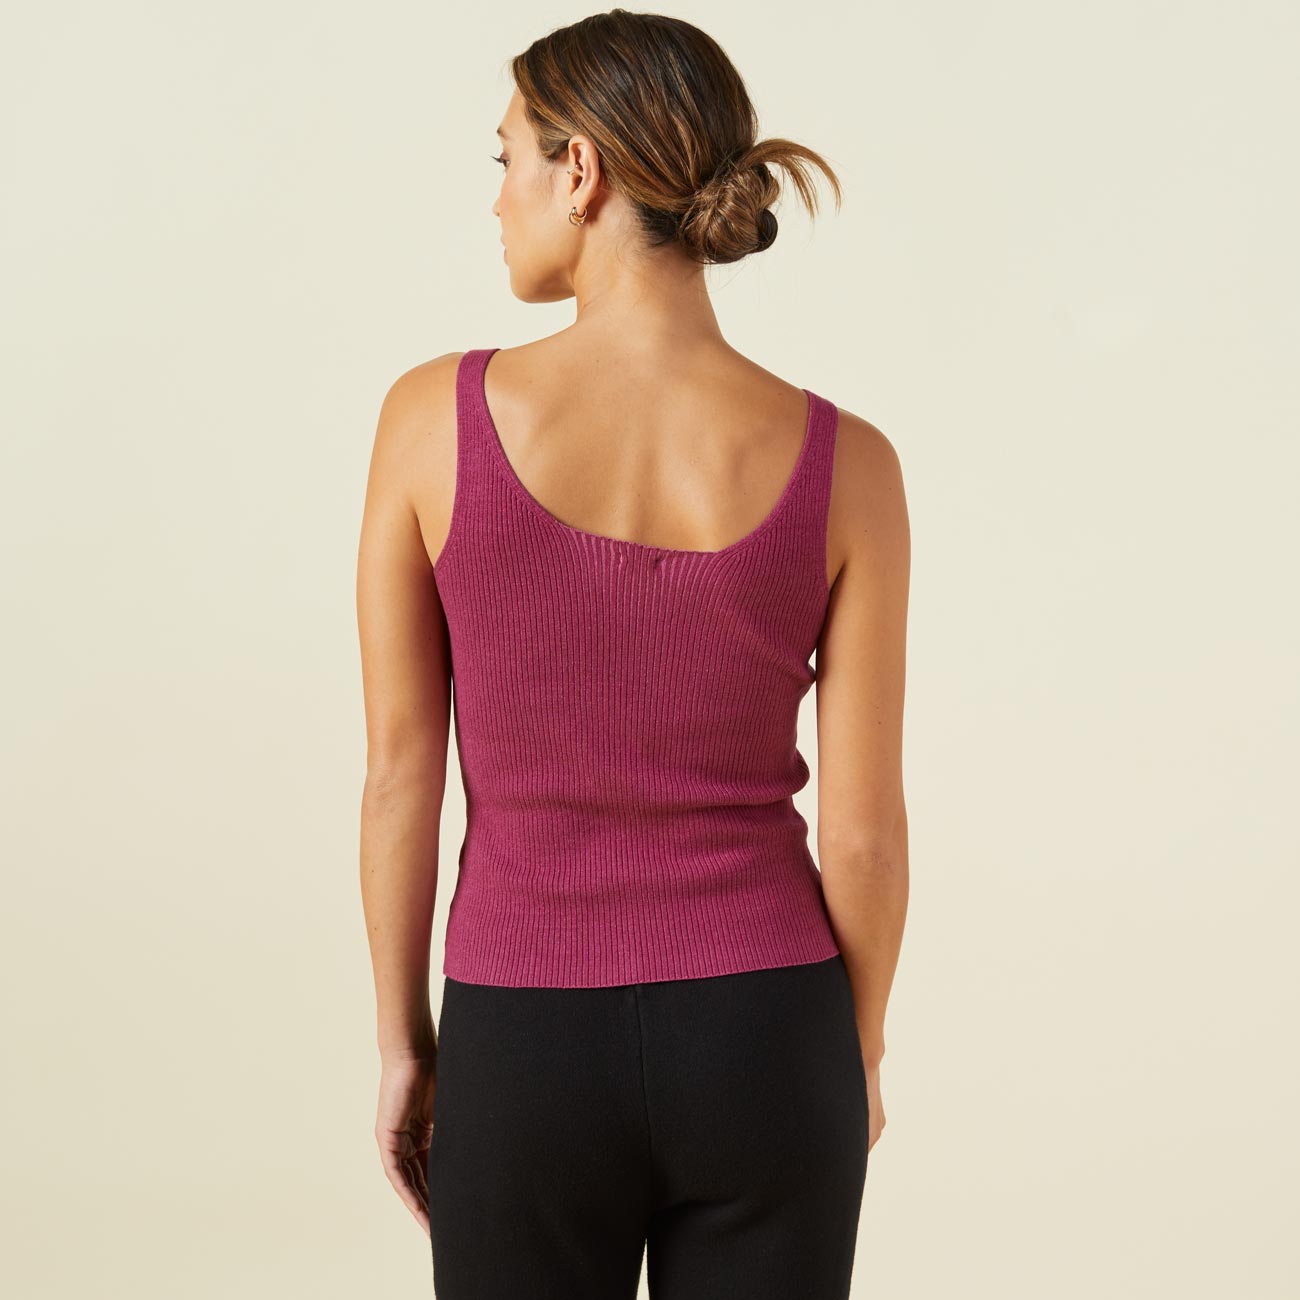 Back view of model wearing the sweater rib tank in raspberry rose.